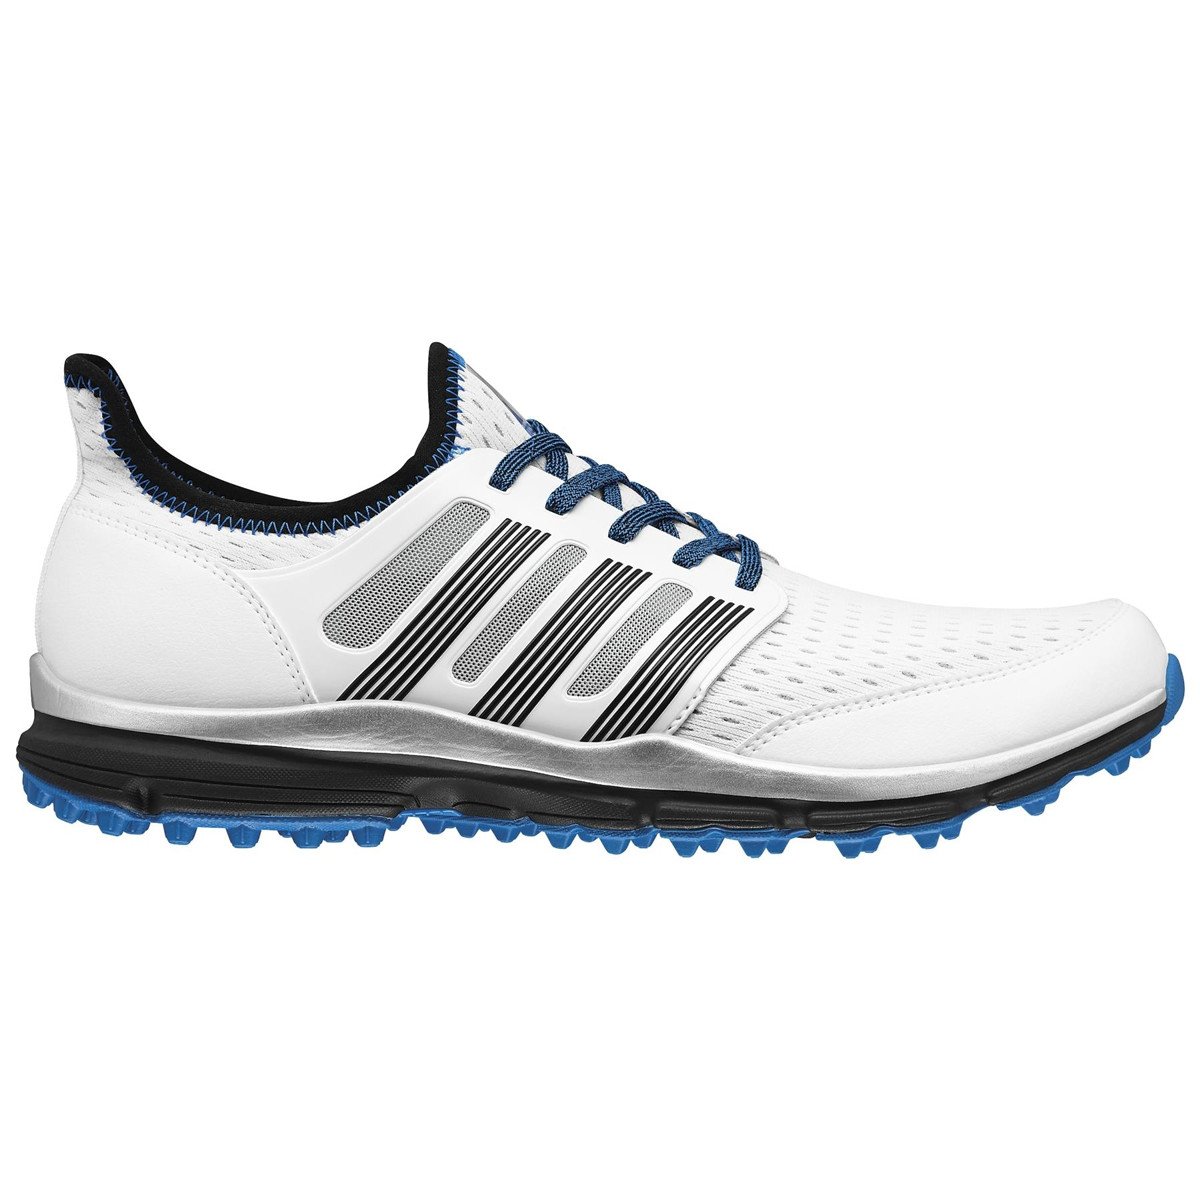 adidas climacool golf shoes 14